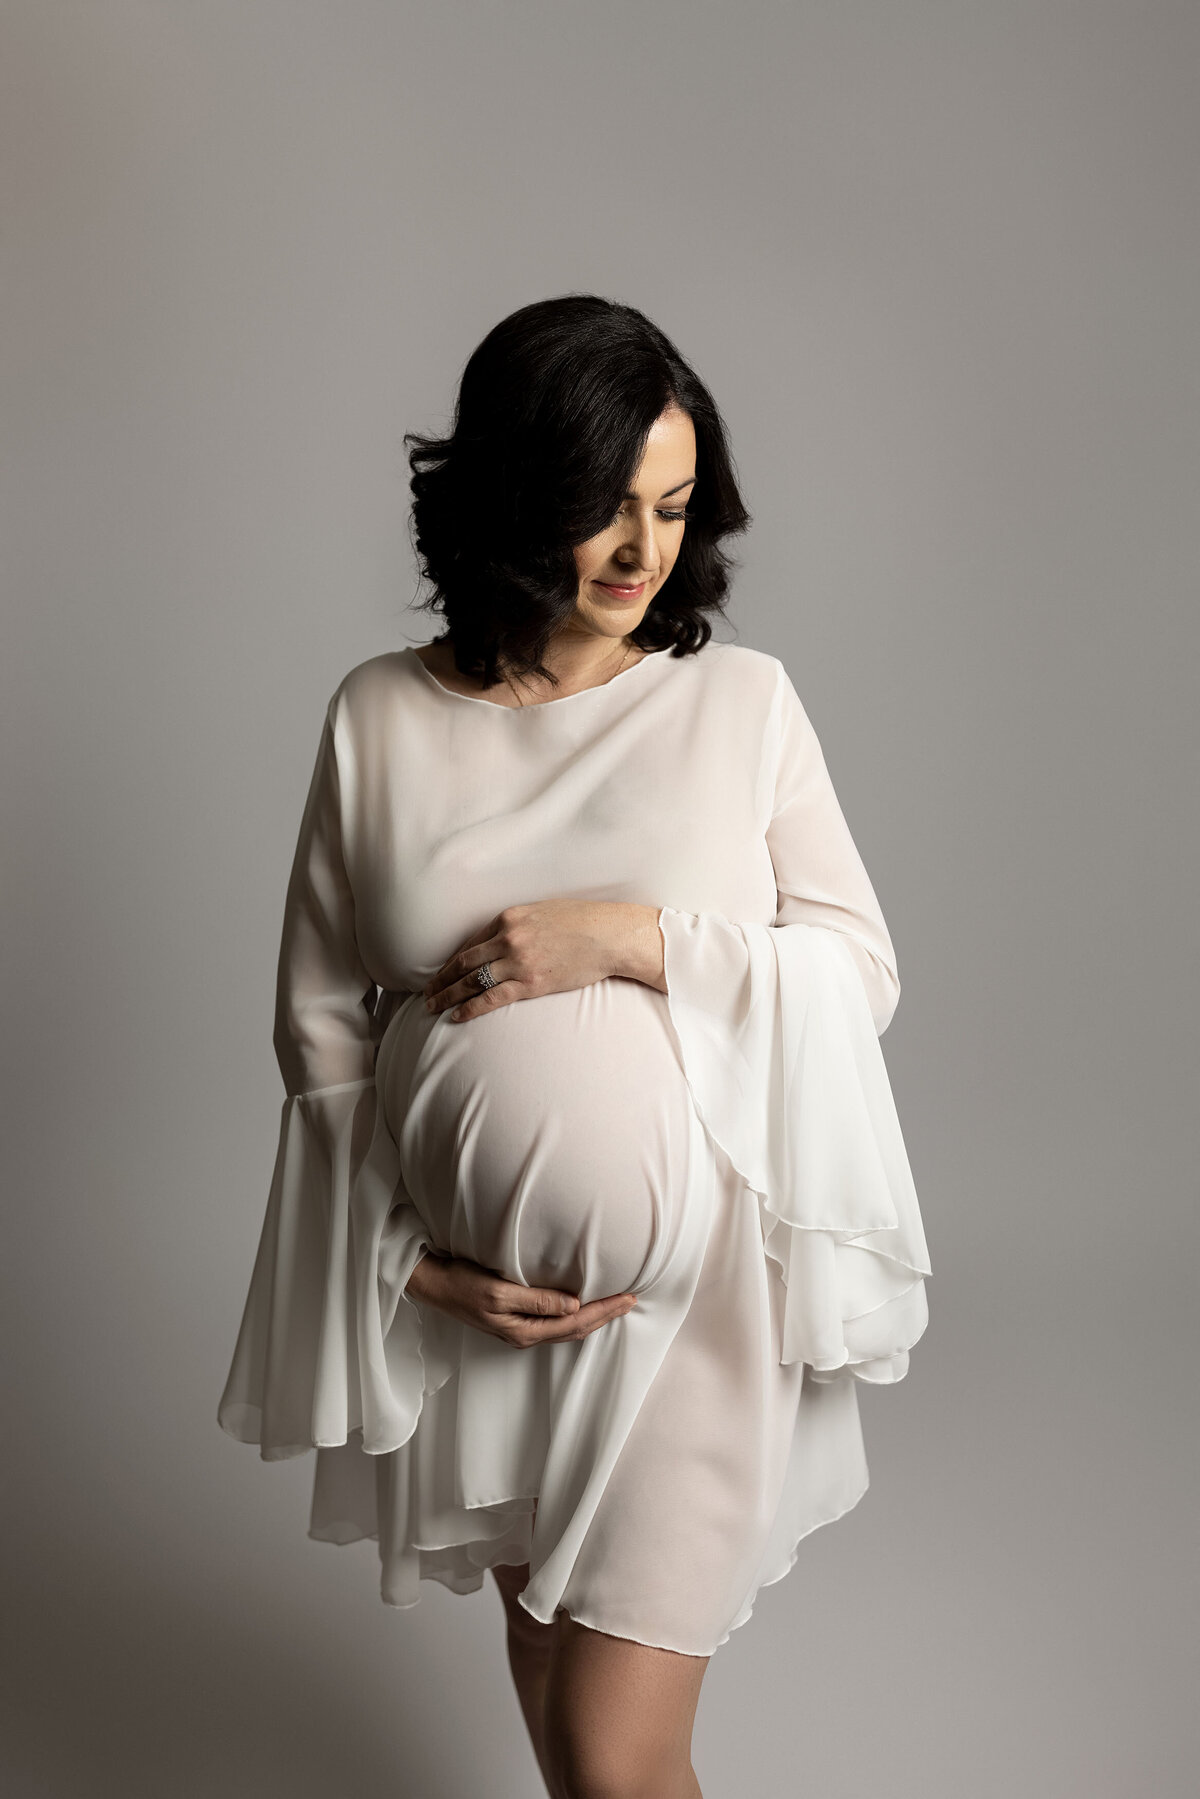 Maternity studio portrait of expectant mom shot by top london, ontario maternity photographer Ogg Photography. Mom is standing in a flowy knee-length white dress with one hand on top and the other above her baby bump. She is looking down and smiling at her belly. Side profile image of mom with shoulder-length wavy black hair.